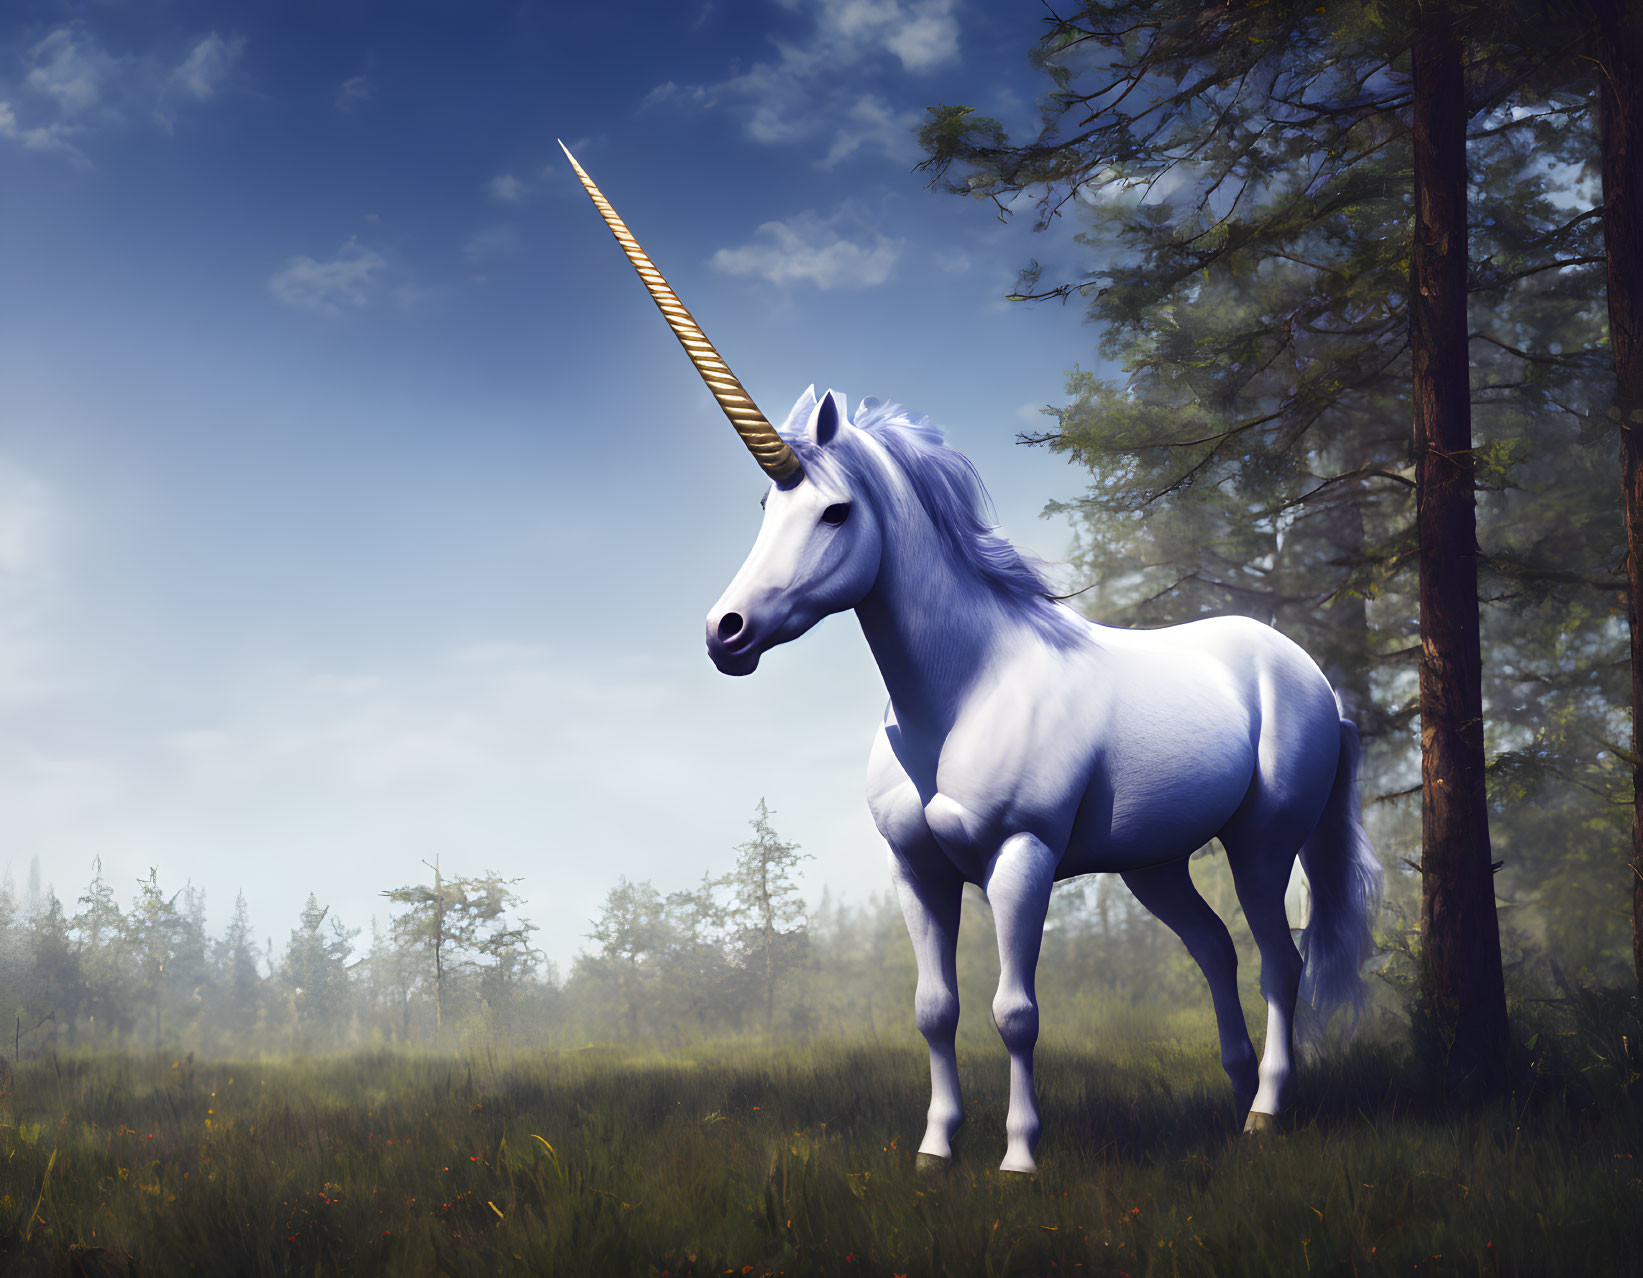 White Unicorn with Golden Horn in Serene Forest Clearing